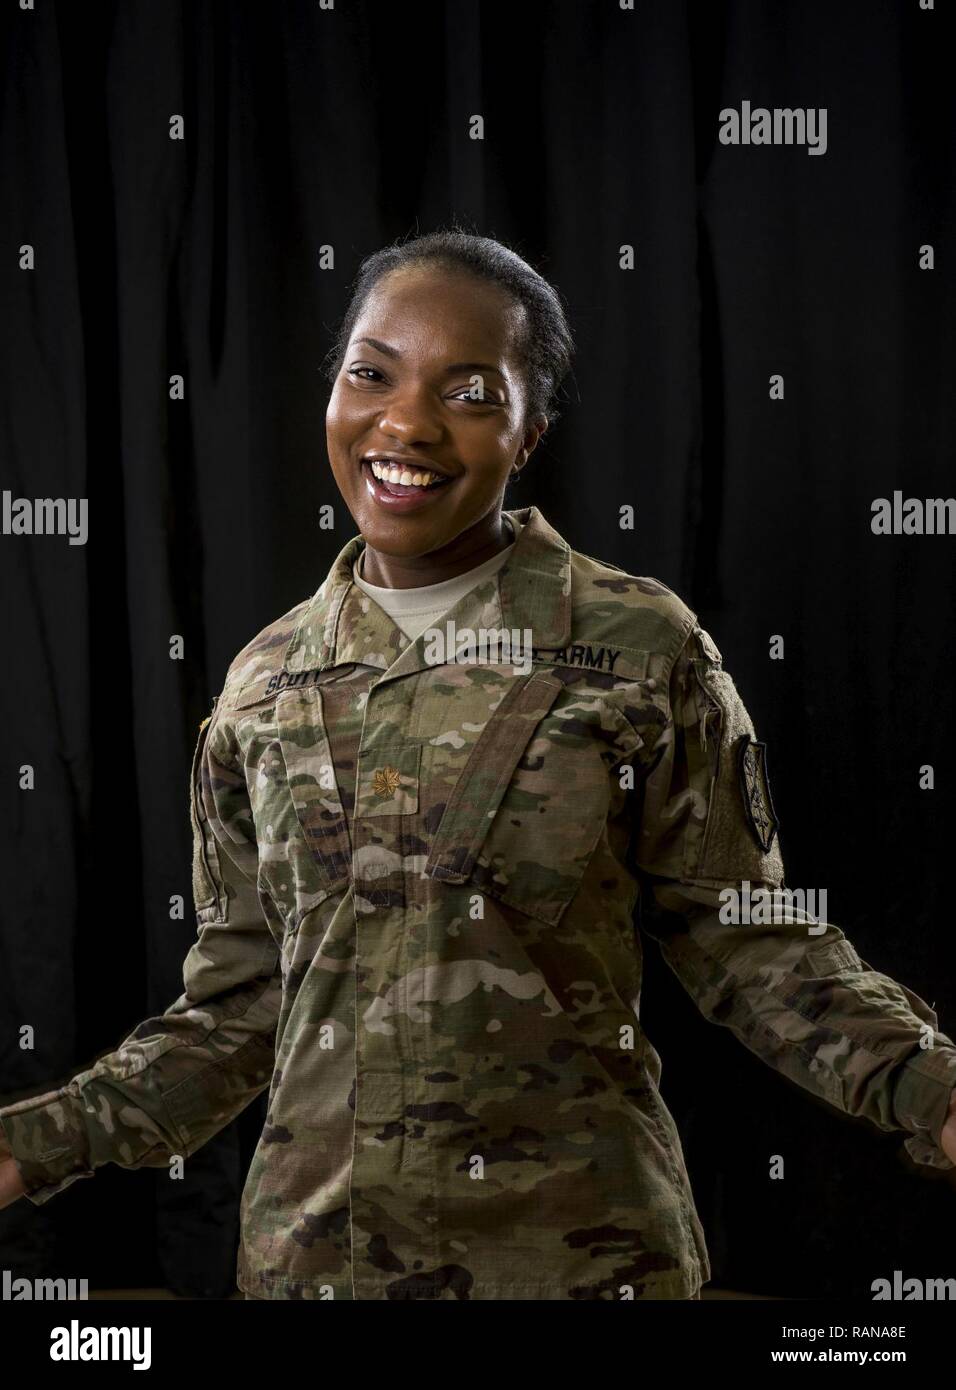 Serving in the Army Reserve as an African American female provides me the  opportunity to motivate future generations of minority females that the sky  is the limit. Don't ever let anyone put